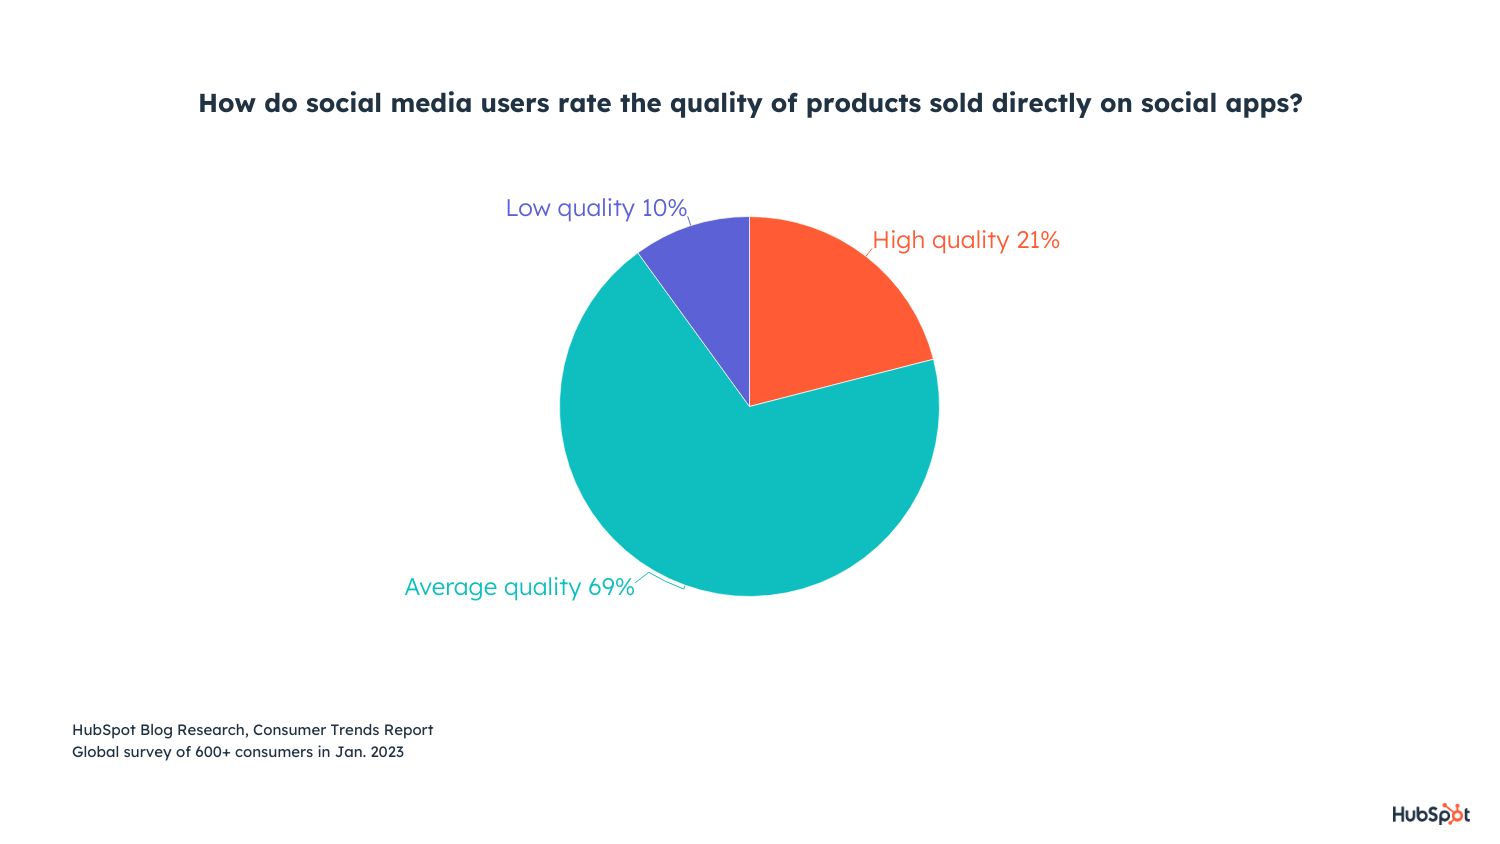 people dont rate products on social apps as high quality